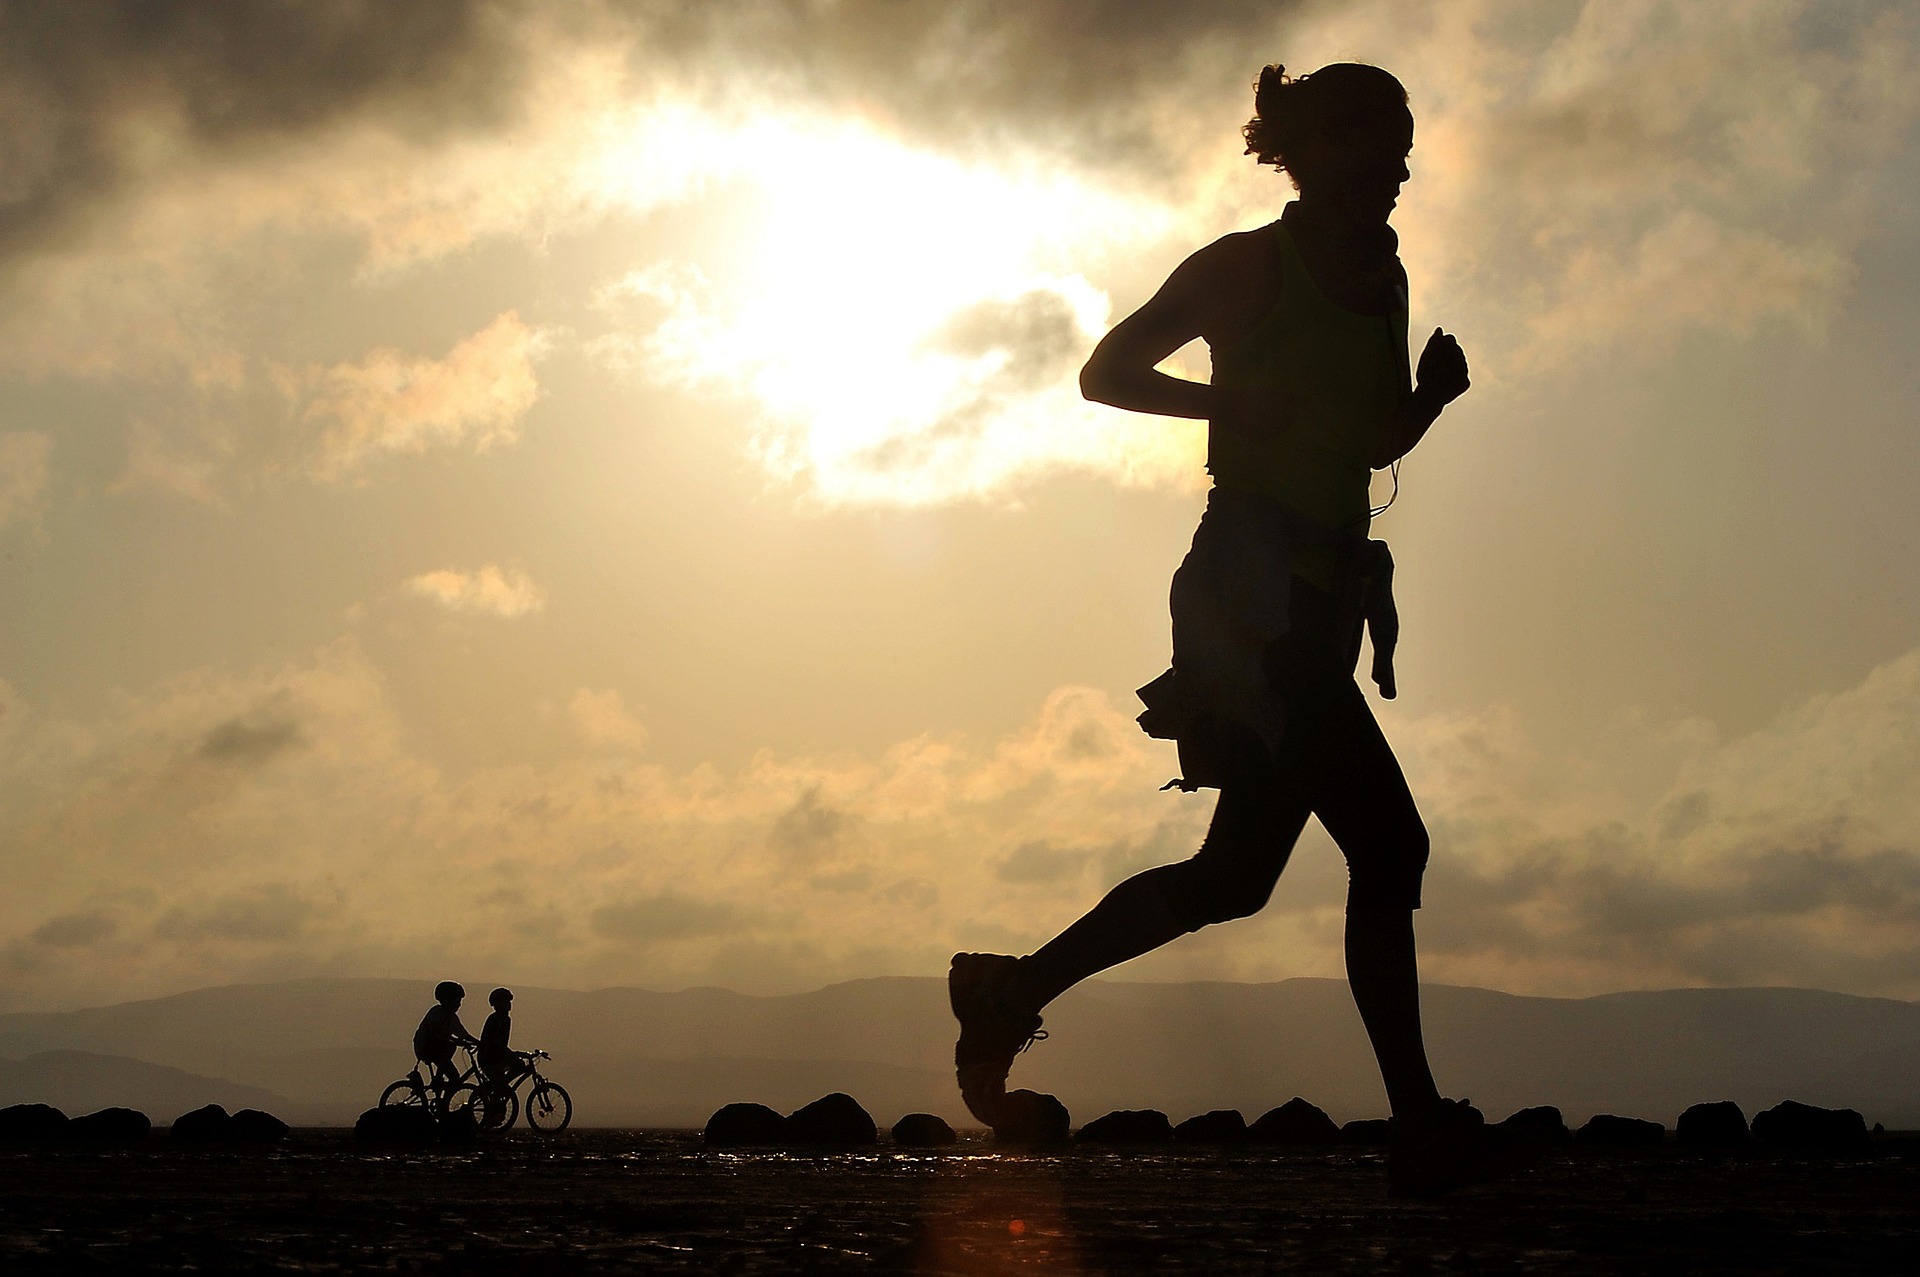 How To Add A Long Run To Your Running Routine